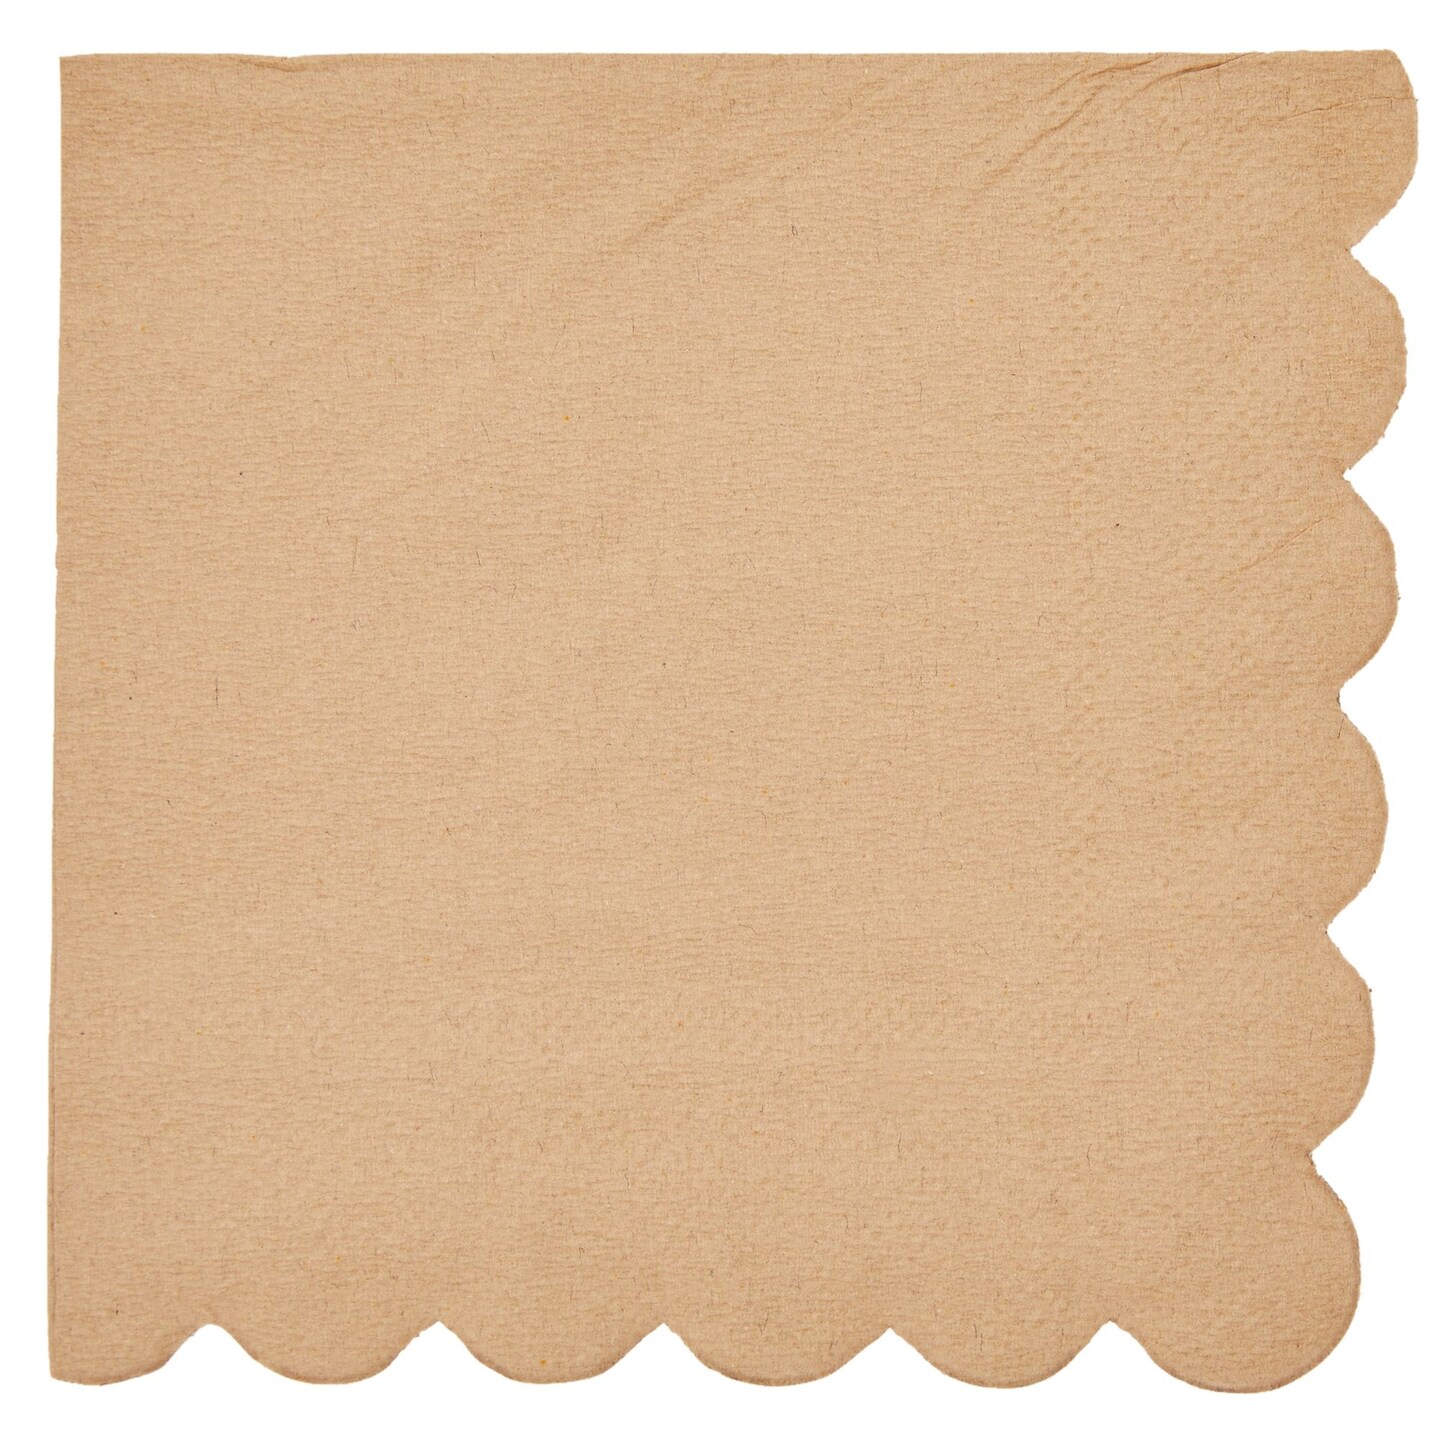 100 Pack Brown Paper Napkins with Scalloped Edges - 2-ply Disposable Cocktail Napkins for Wedding, Birthday Party (5x5 In)